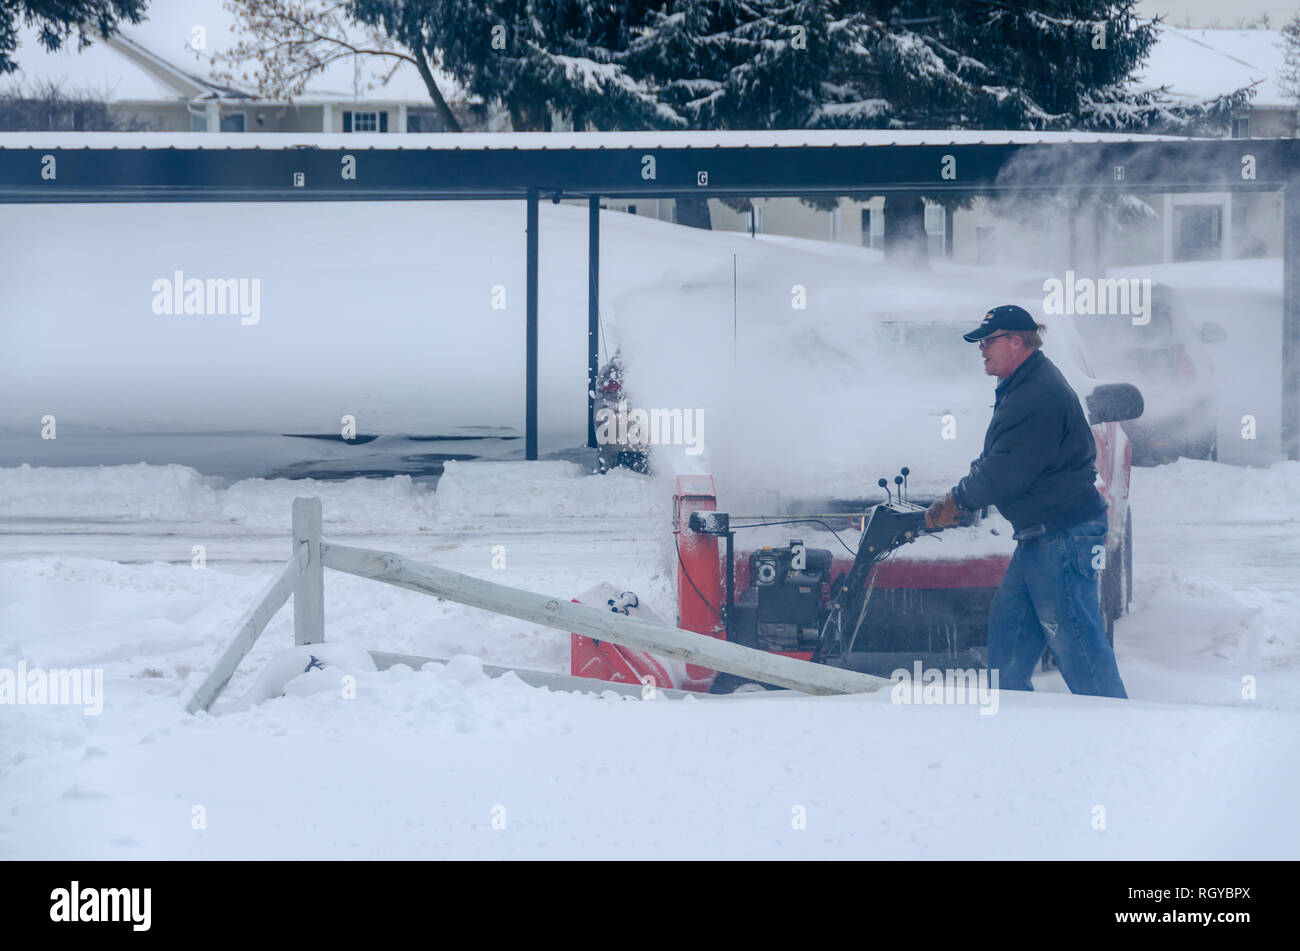 Extreme winter weather! A man clearing snow from a sidewalk with a mechanical snow blower after a winter storm in Michigan, USA. Stock Photo